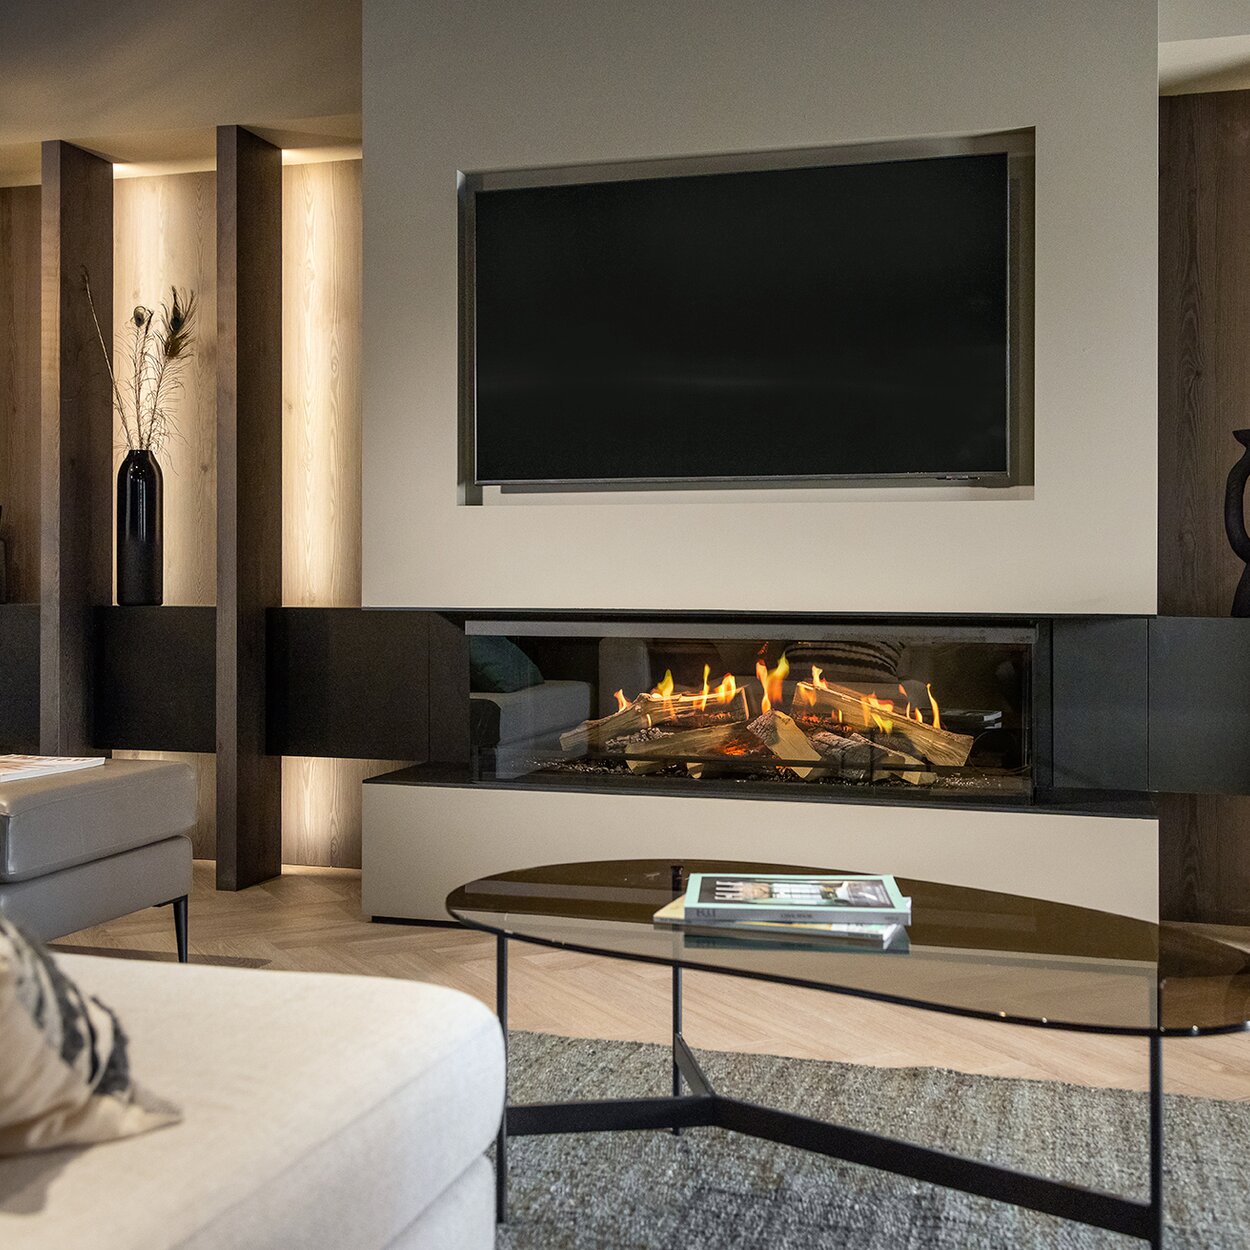 The 3-sided electric fireplace E-One 130 S installed on a wooden wall with special lighting.